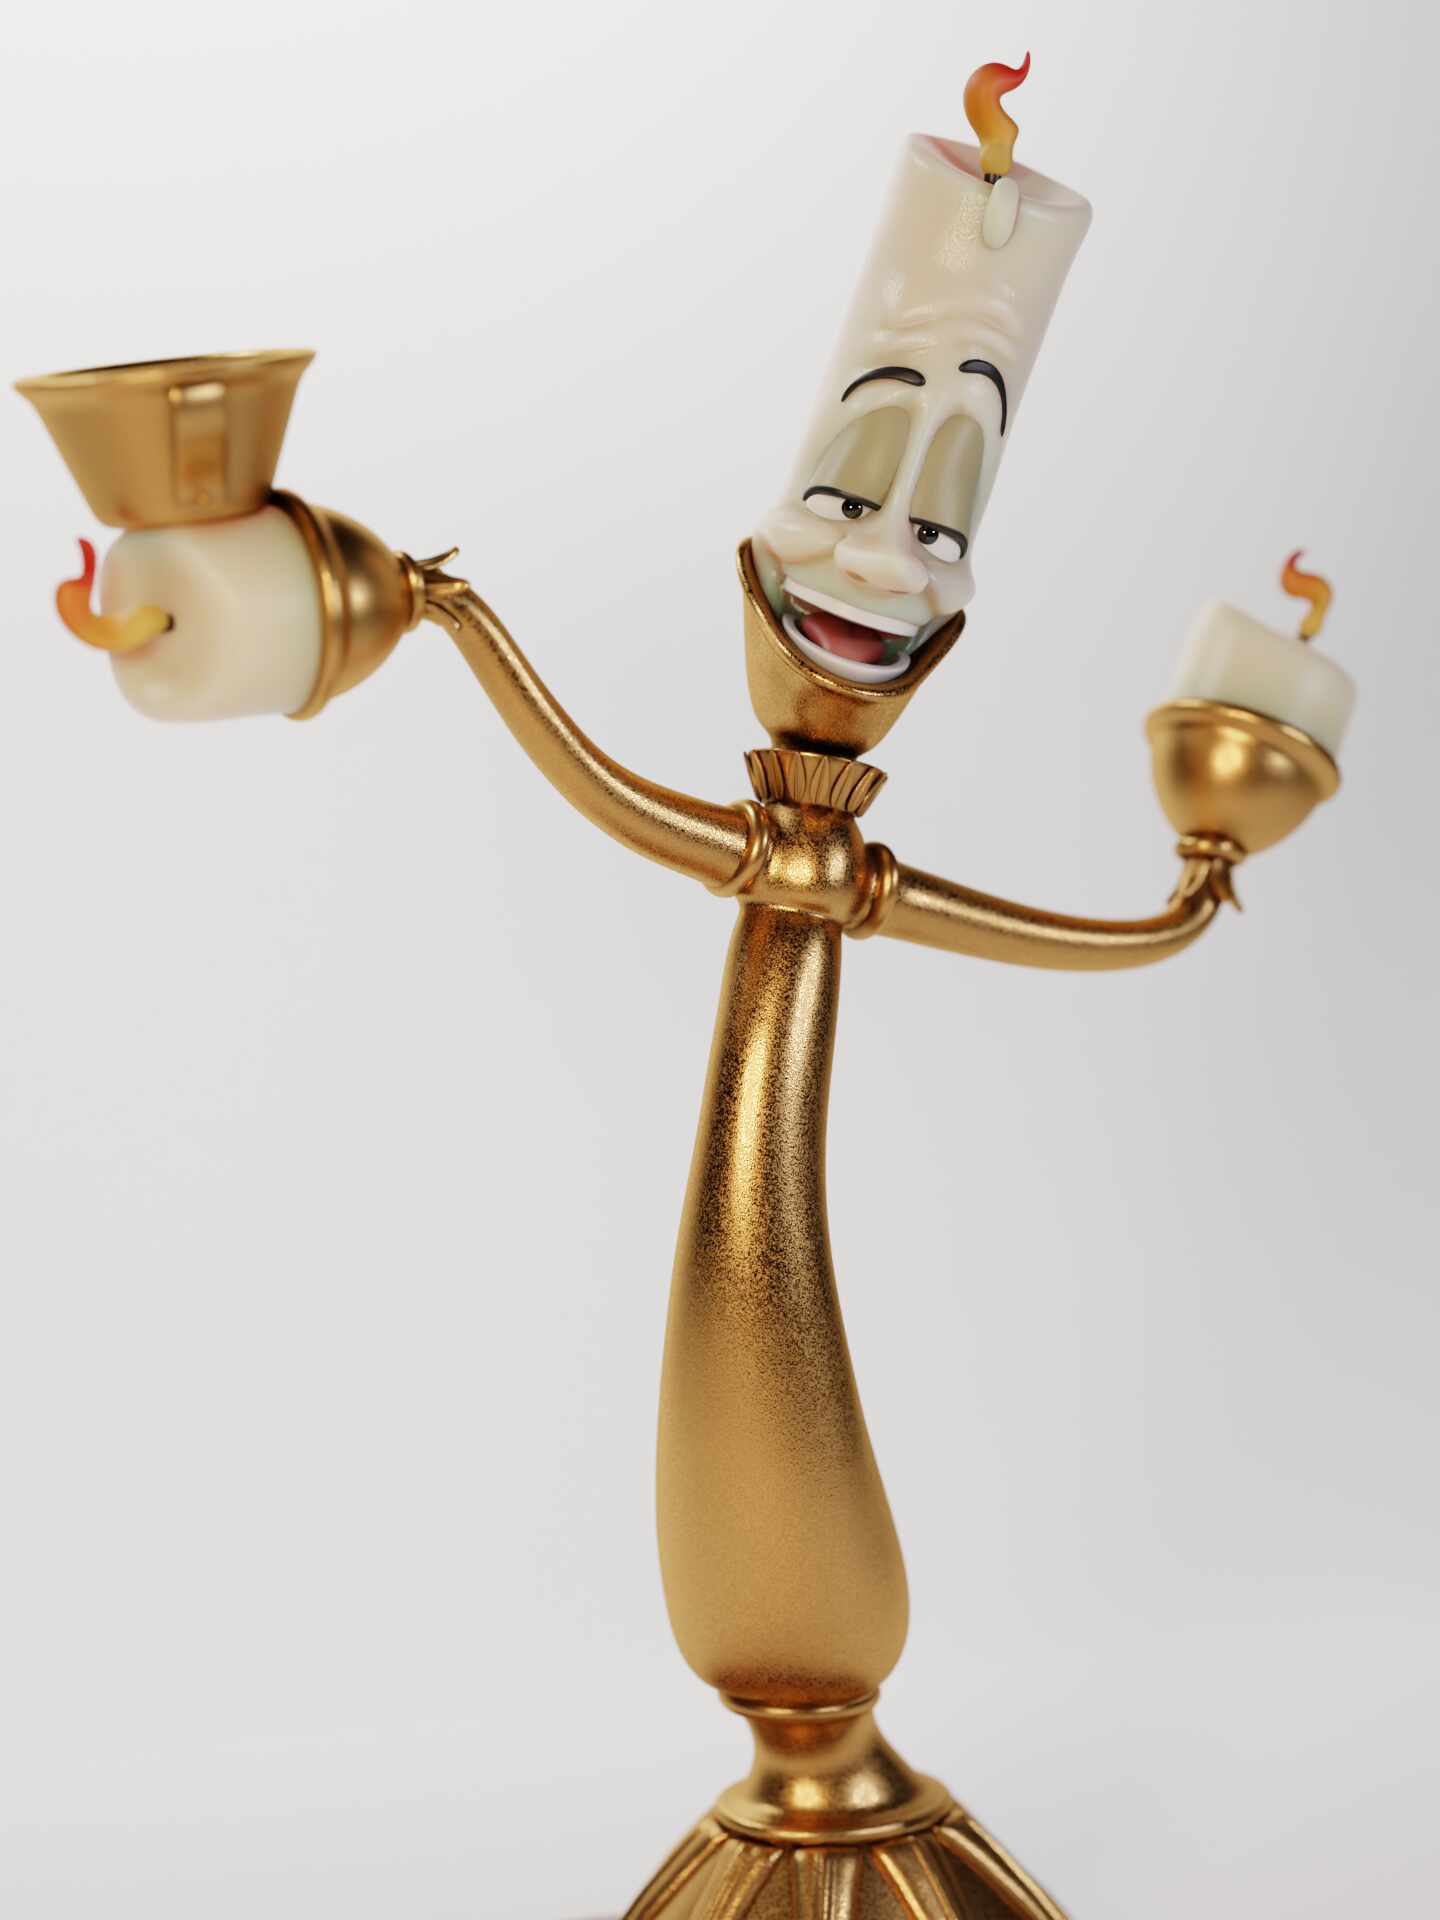 Lumiere - ZBrushCentral